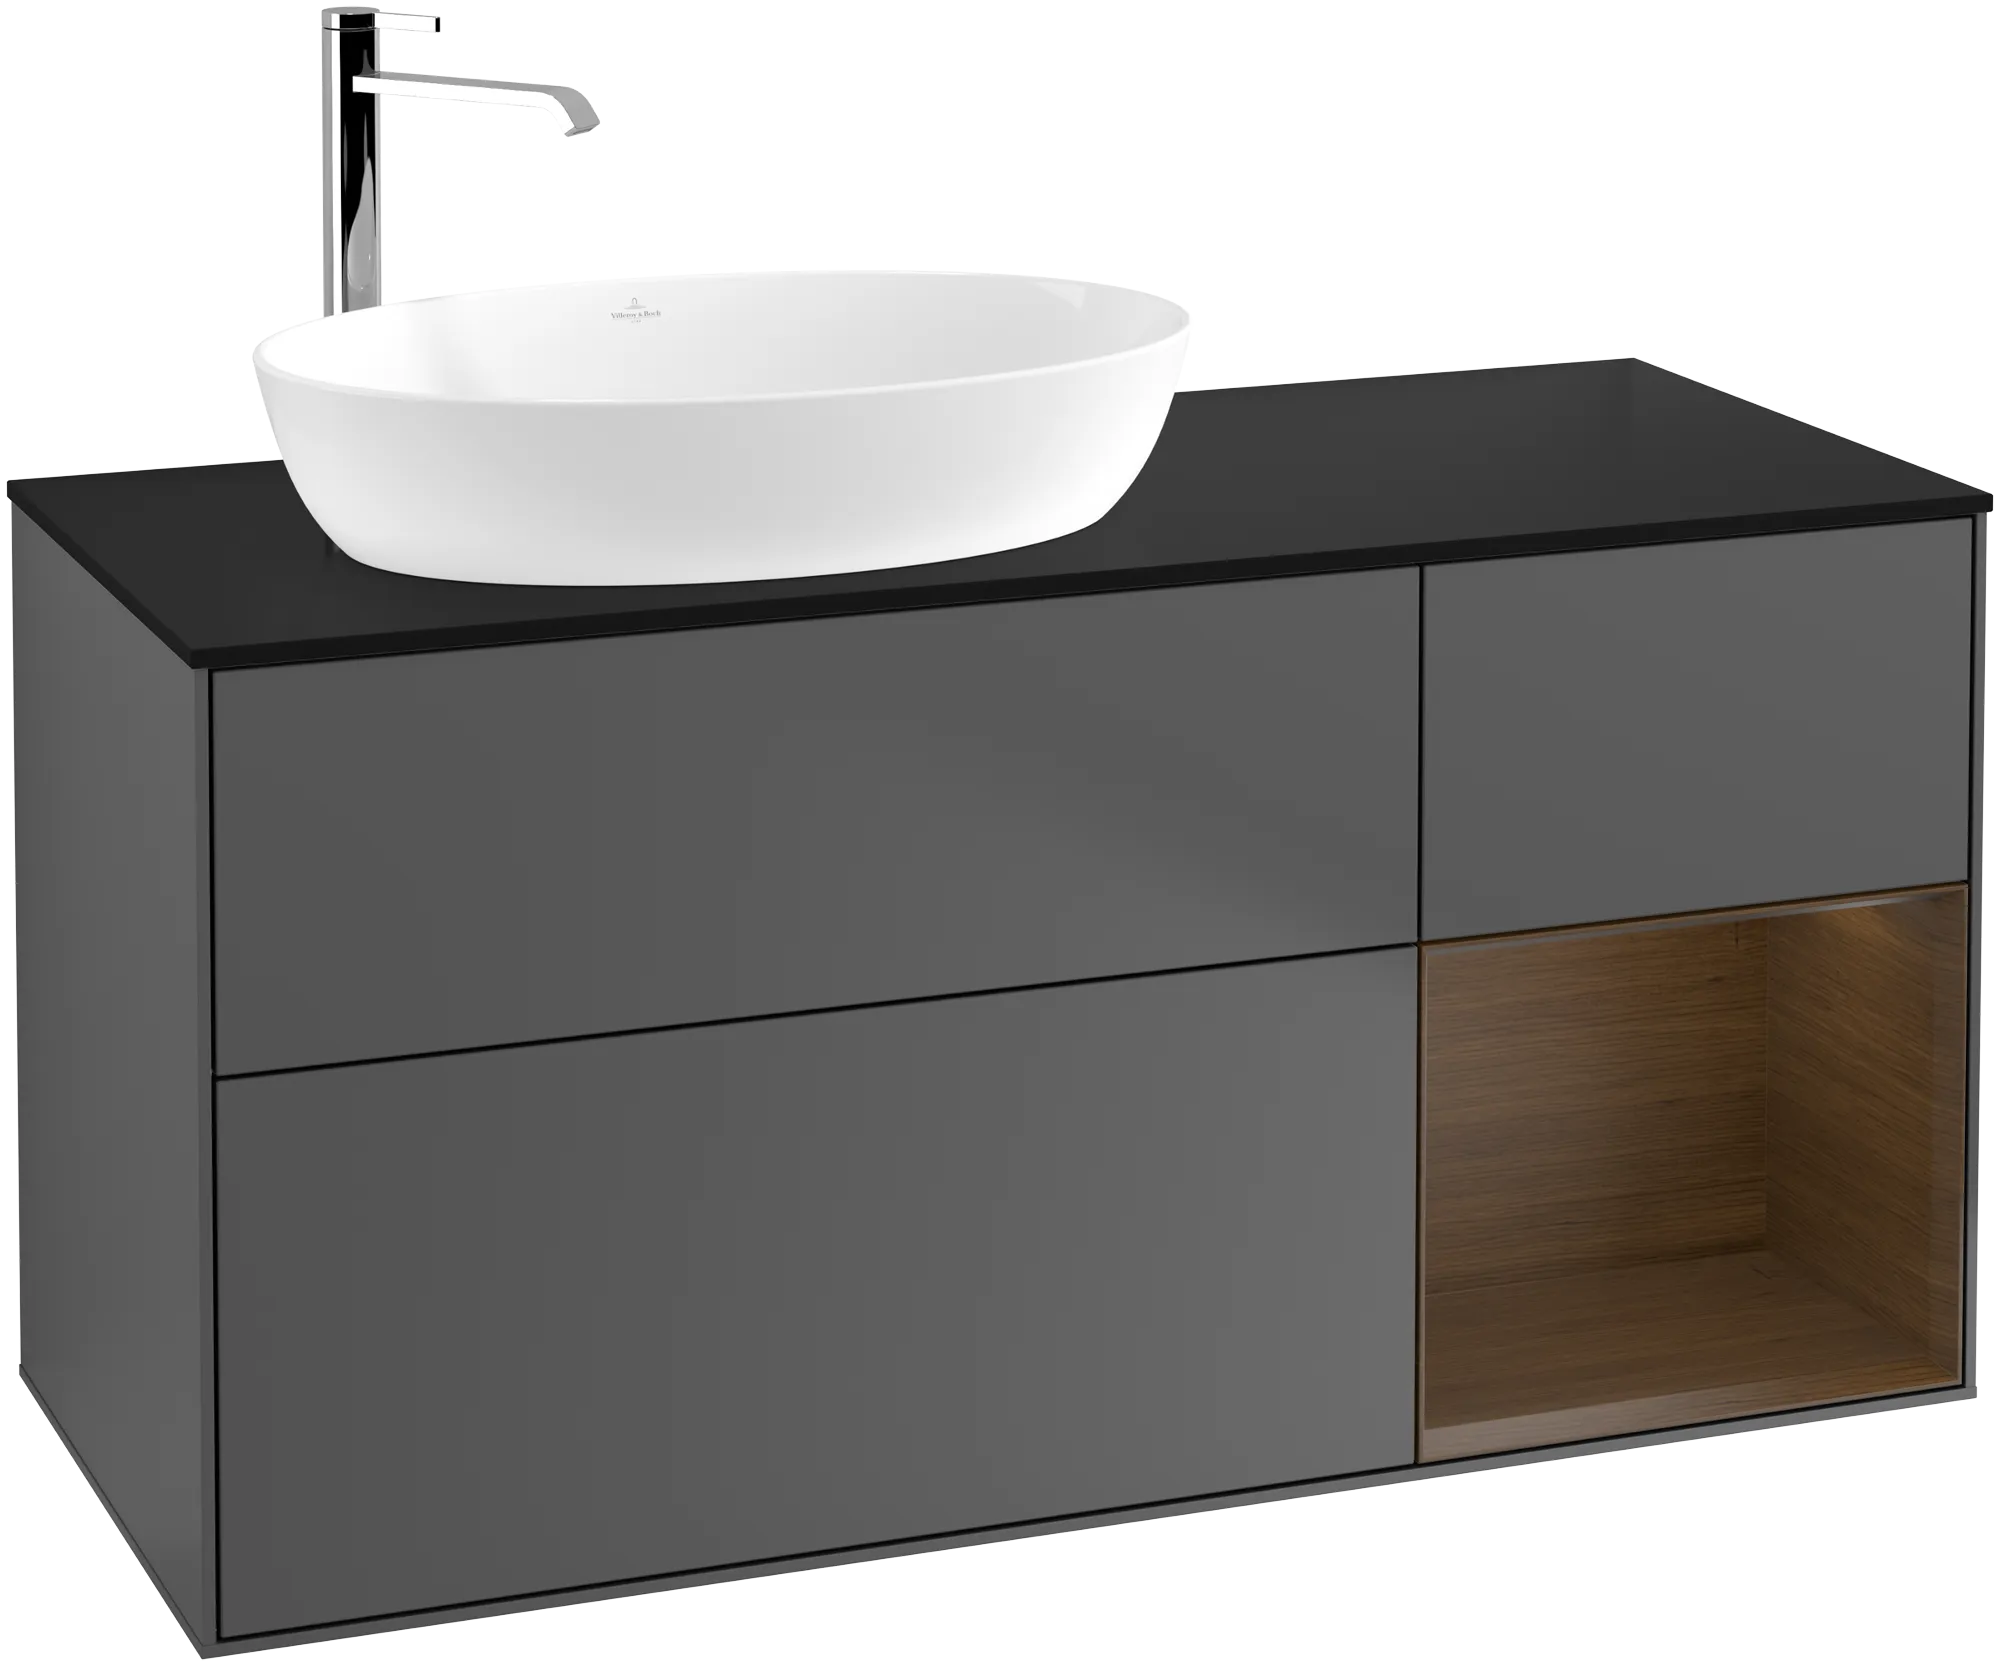 Picture of VILLEROY BOCH Finion Vanity unit, with lighting, 3 pull-out compartments, 1200 x 603 x 501 mm, Anthracite Matt Lacquer / Walnut Veneer / Glass Black Matt #G932GNGK